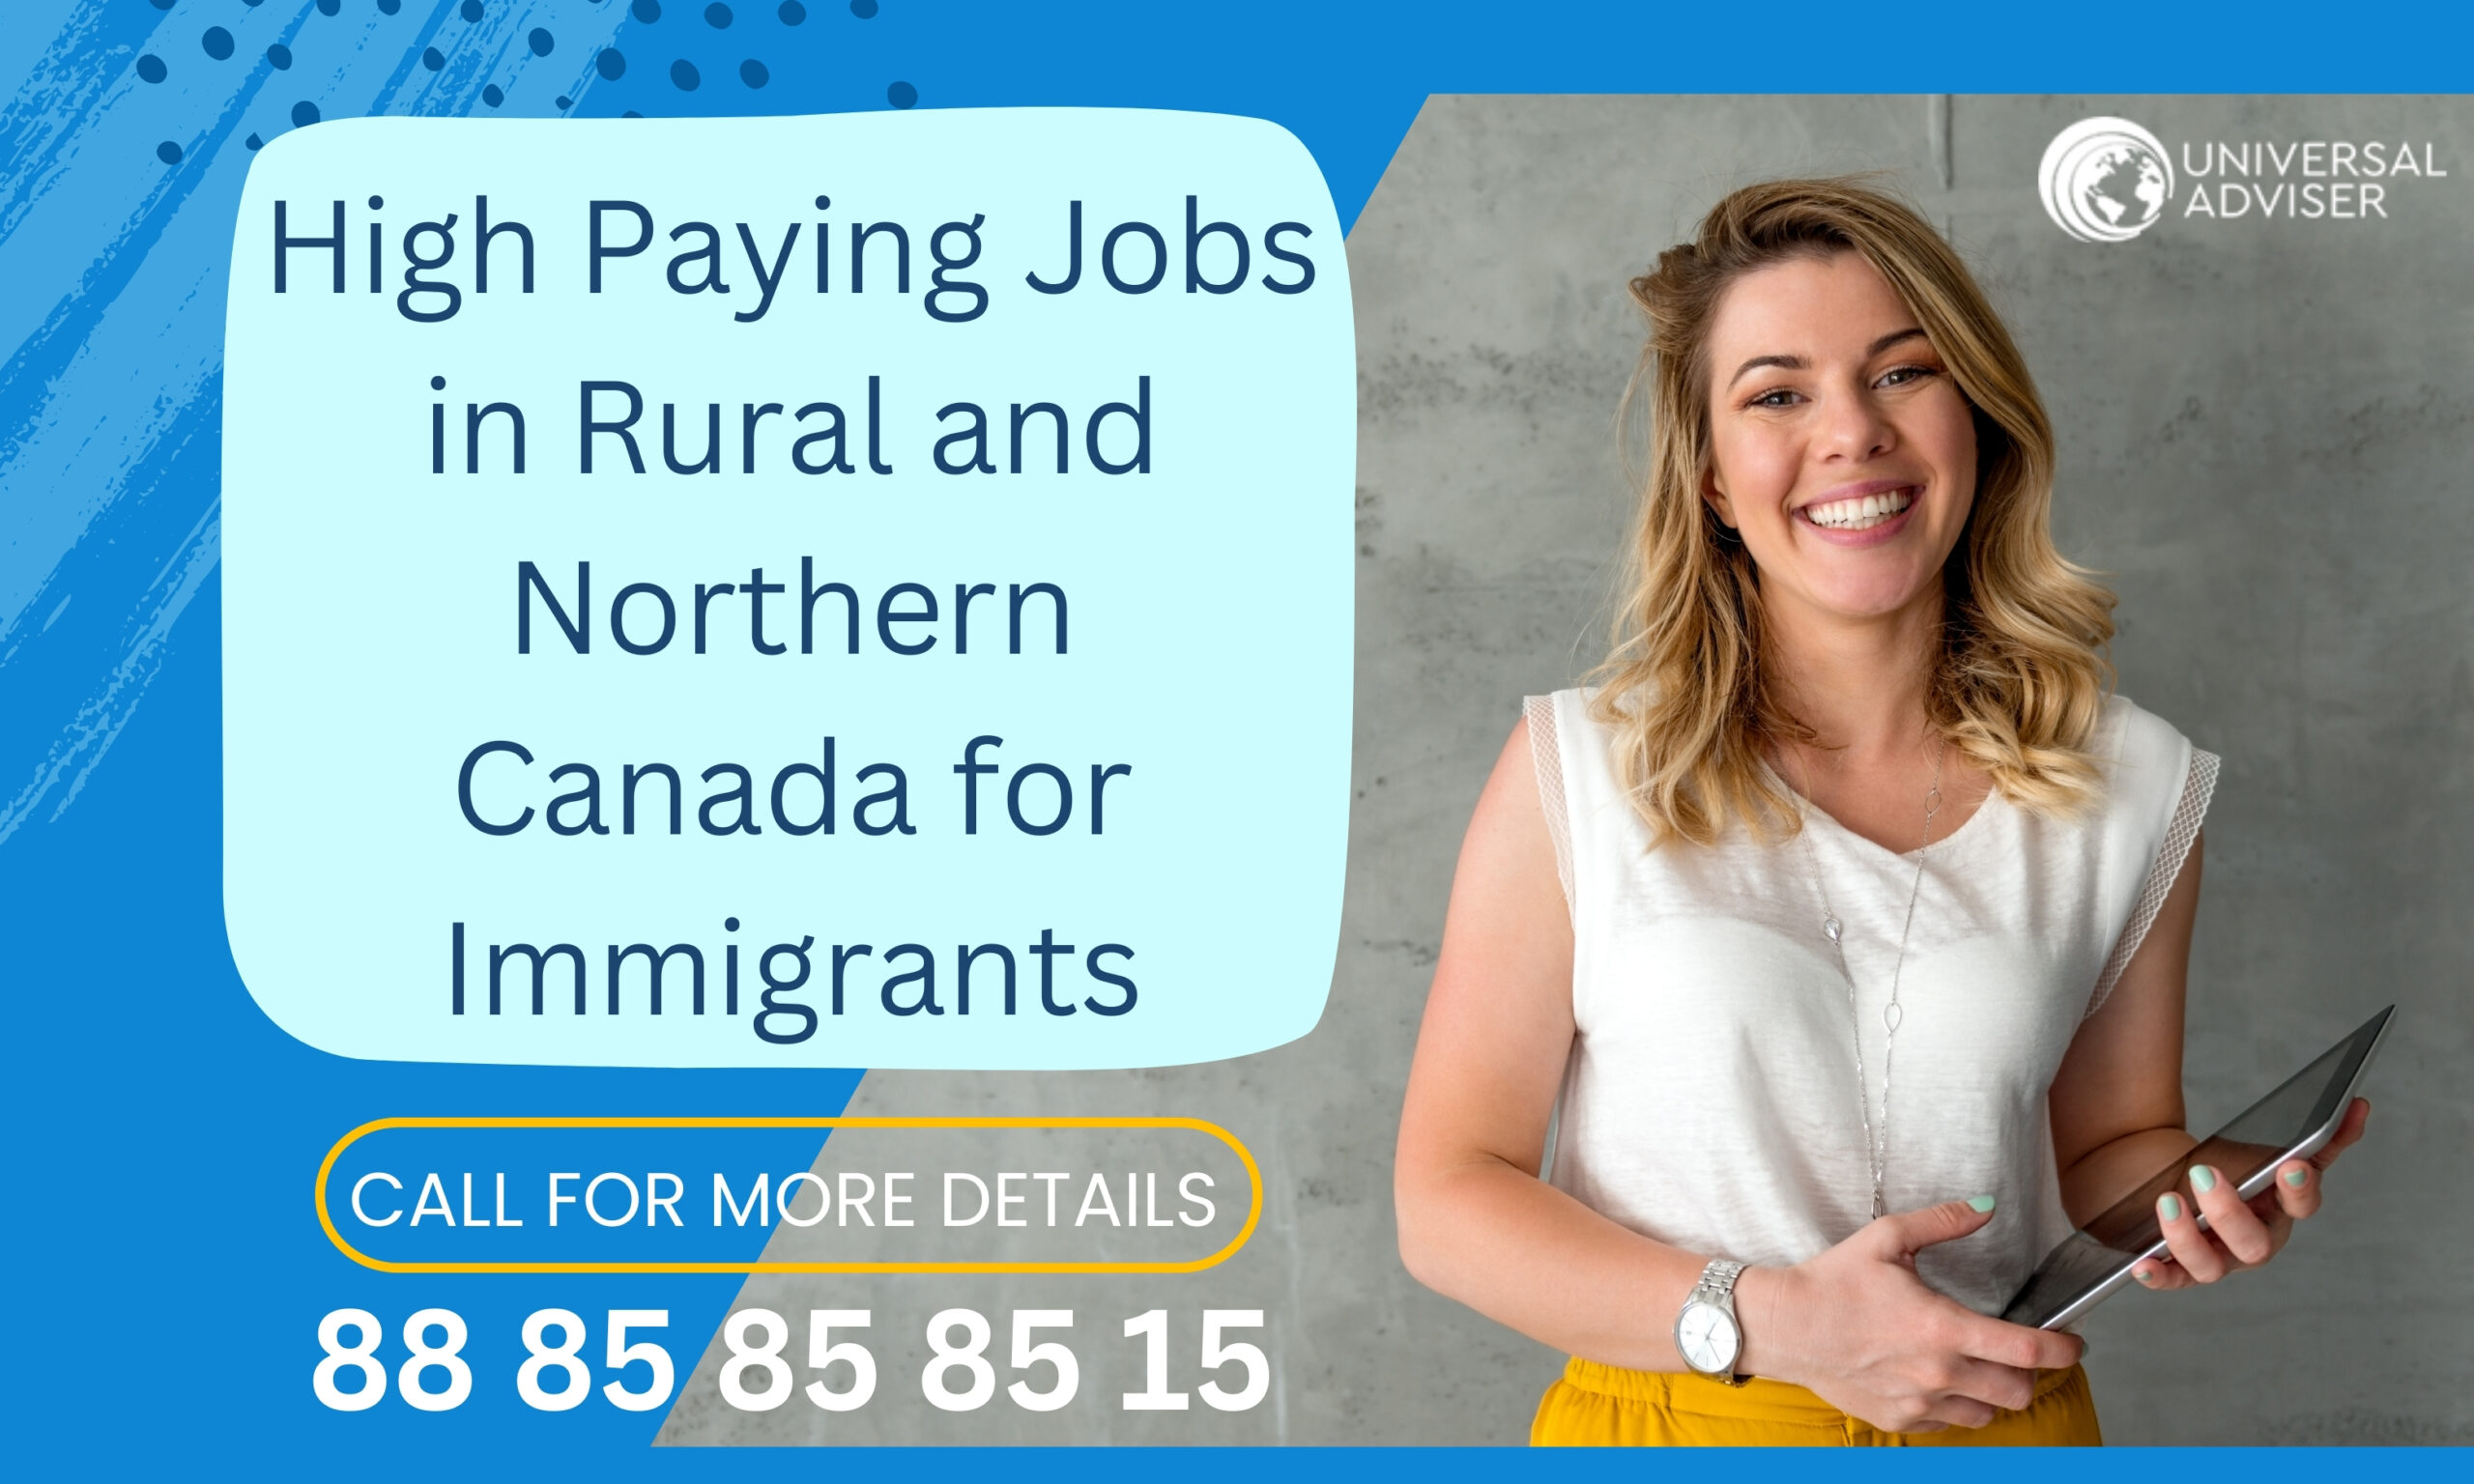 High Paying Jobs in Rural and Northern Canada for Immigrants